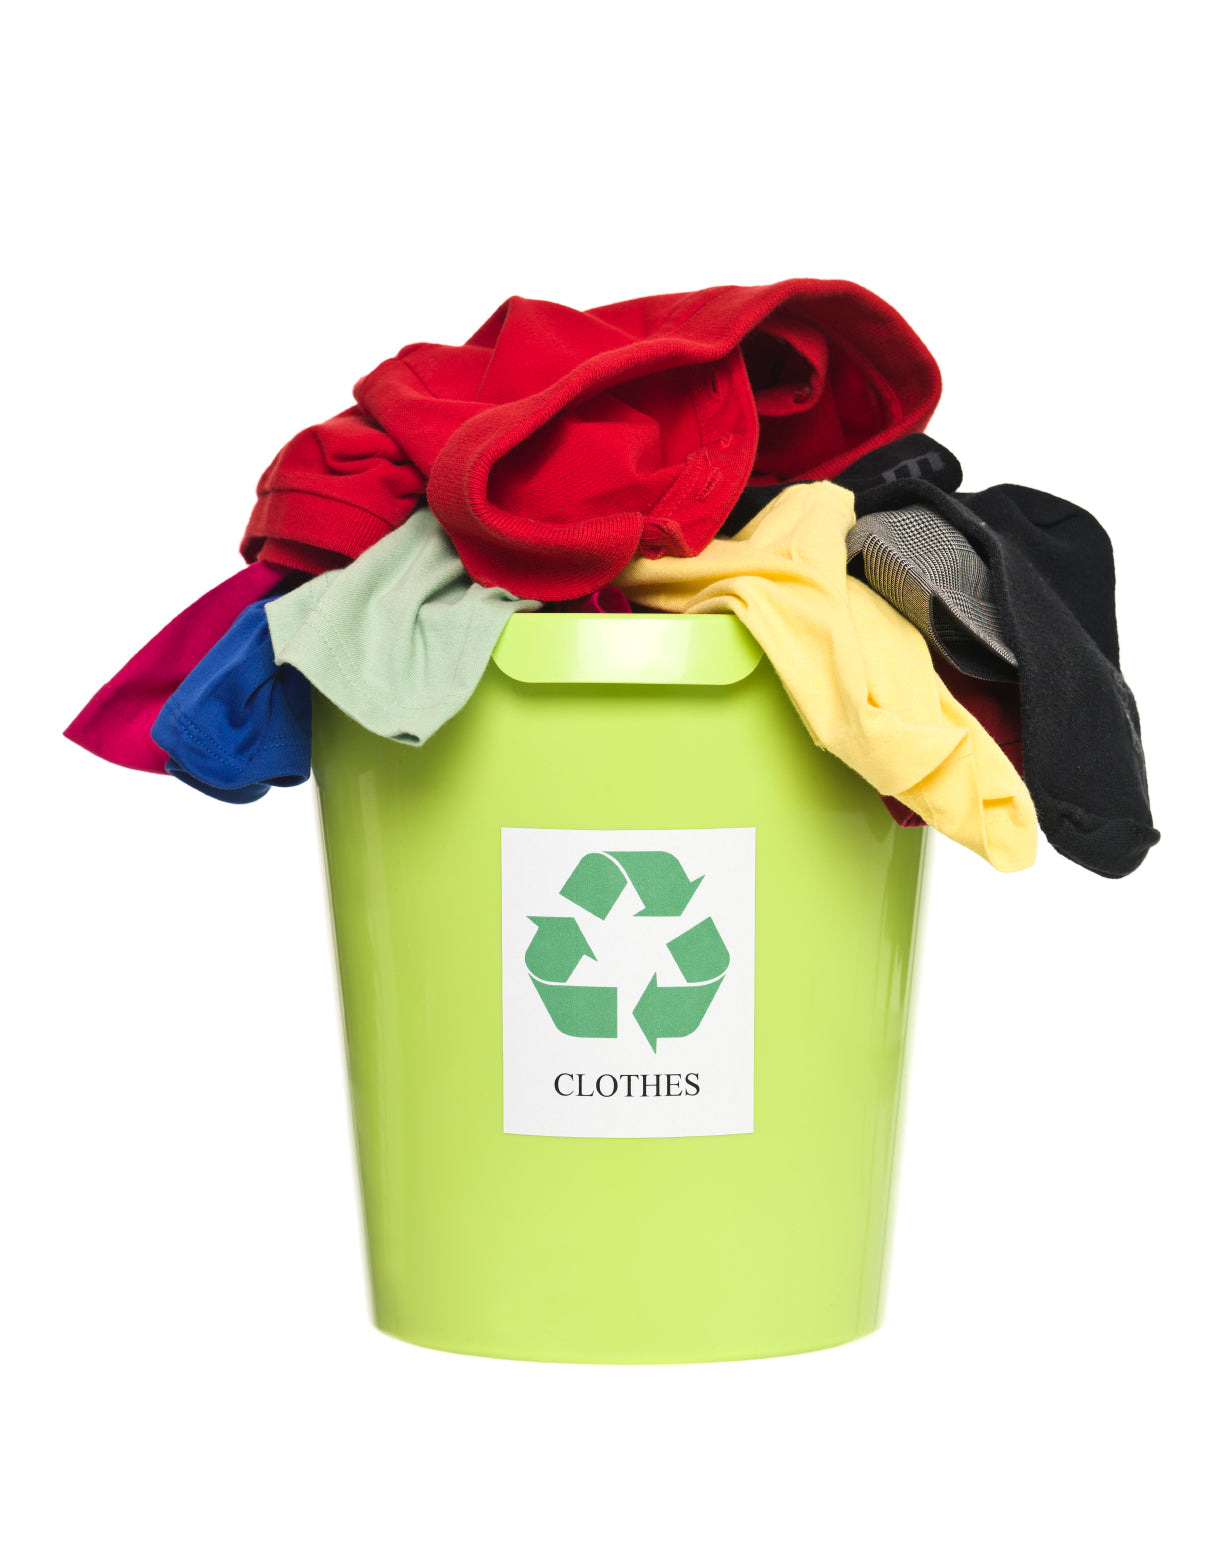 Clothes Recycling: What to Do with Old Clothes & Where to Recycle Them